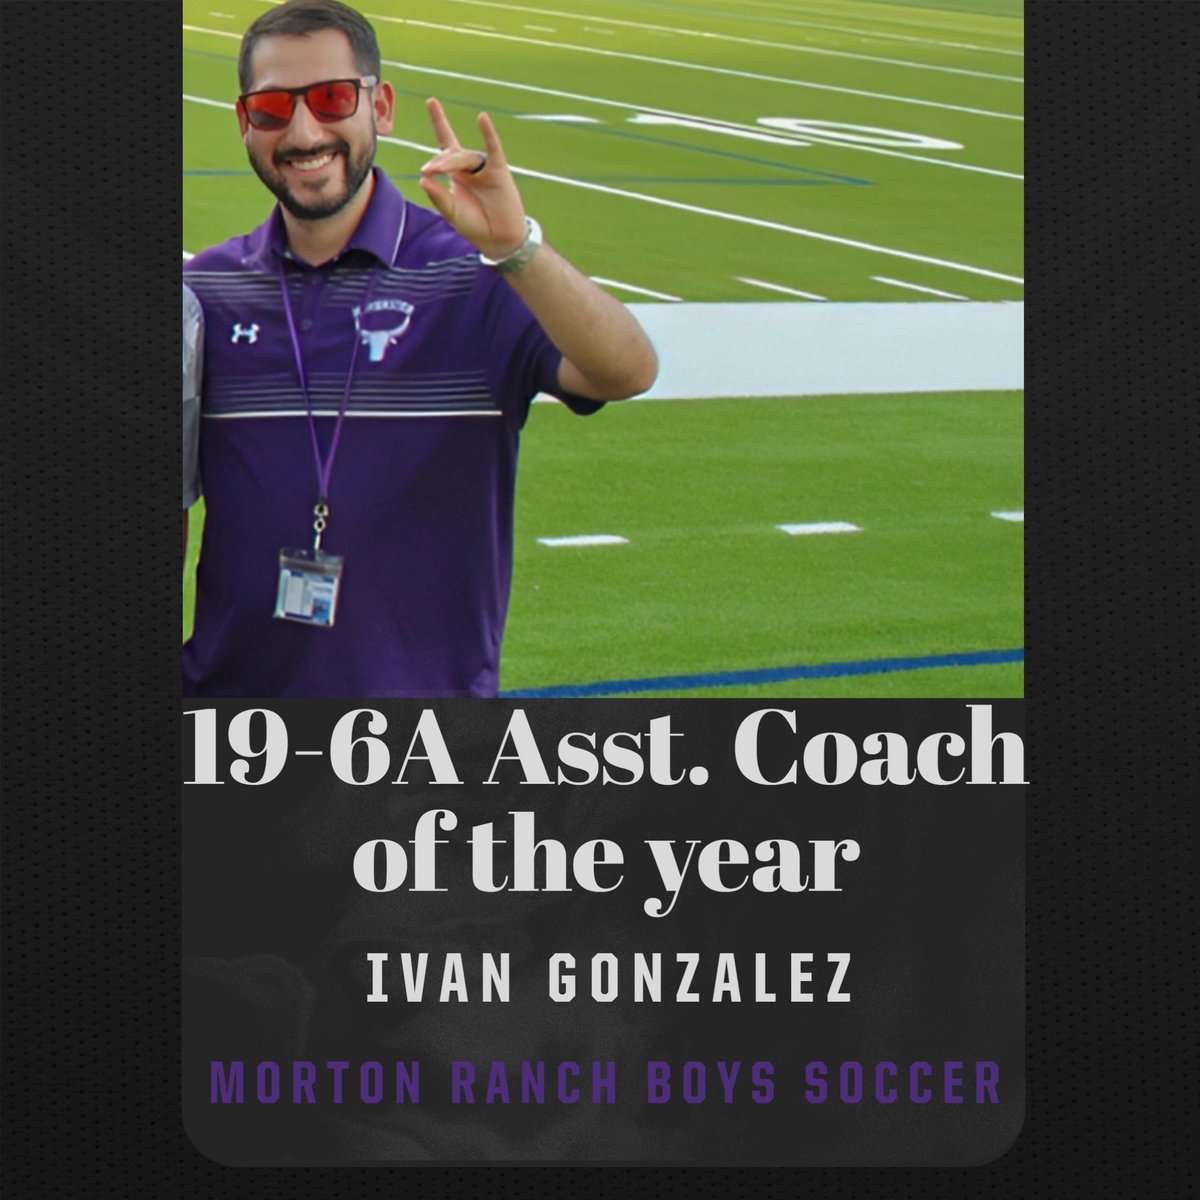 Congratulations to Coach Searle on being voted 19-6A Head Coach of the year and Coach Gonzalez on being voted 19-6A Asst. Coach of the Year!